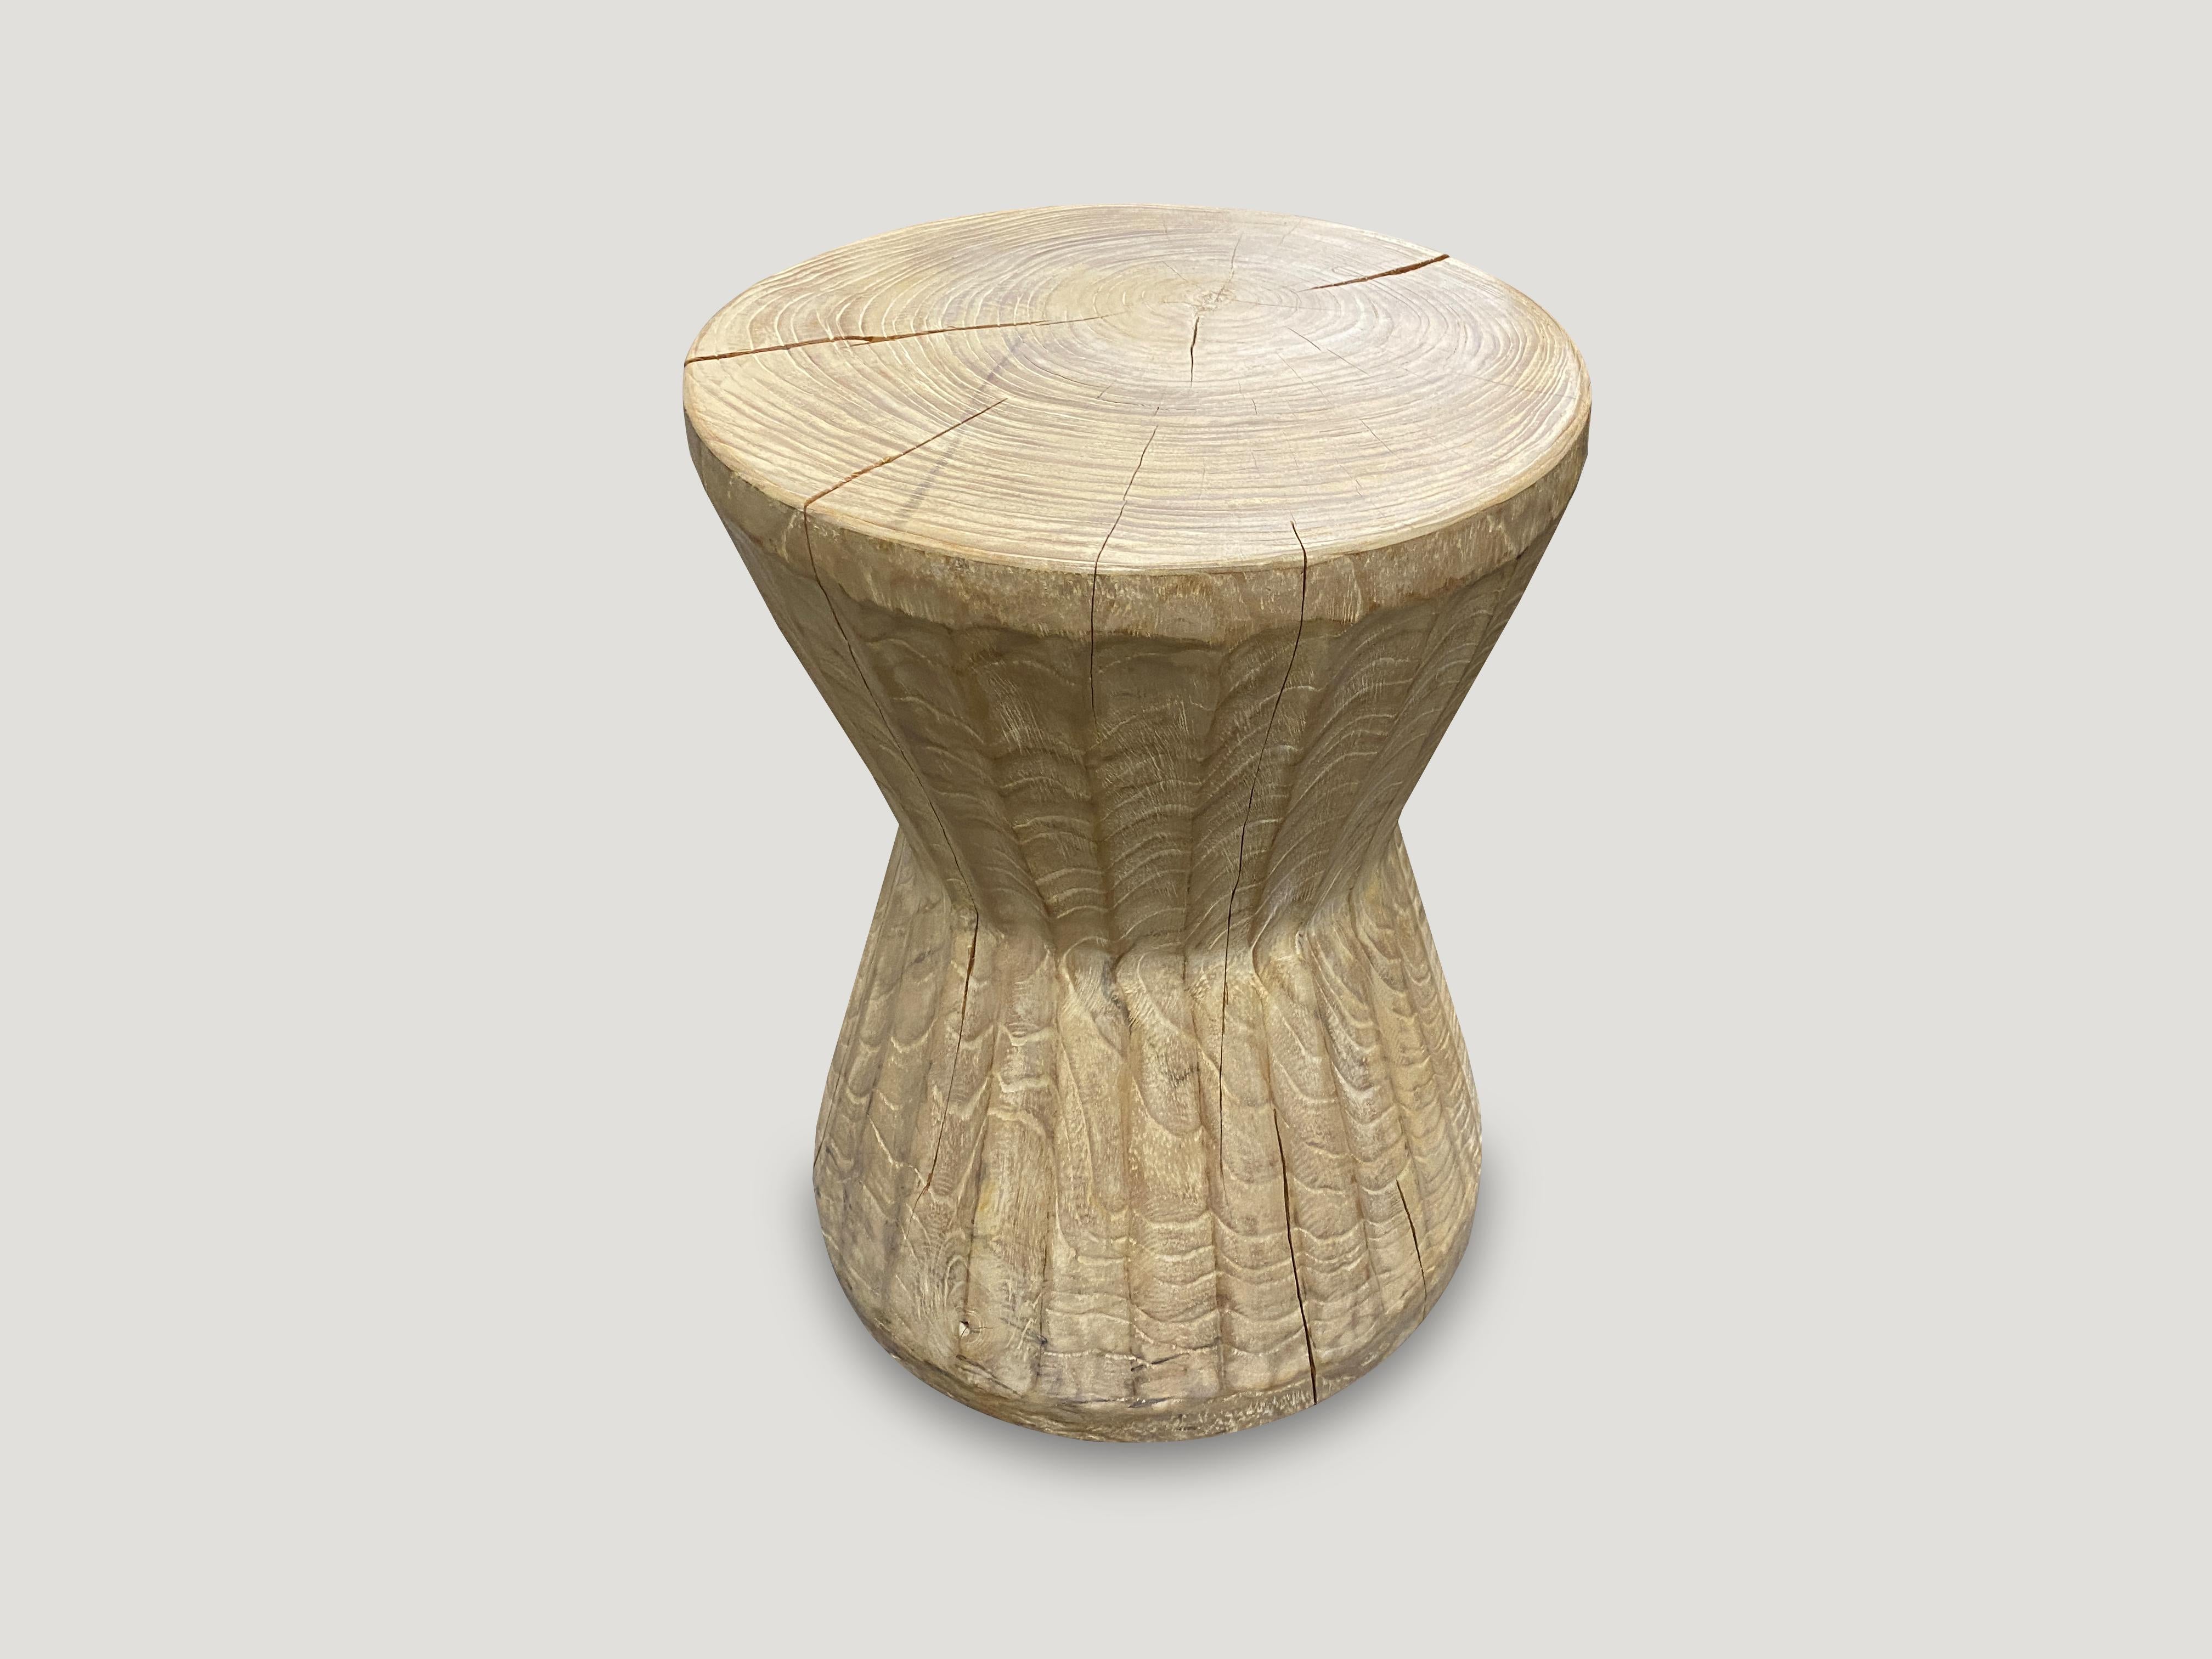 Hand carved beveled side table or stool that celebrates cracks and crevices found in reclaimed teak wood. We have added a ceruse finish.

Andrianna Shamaris. The Leader In Modern Organic Design.